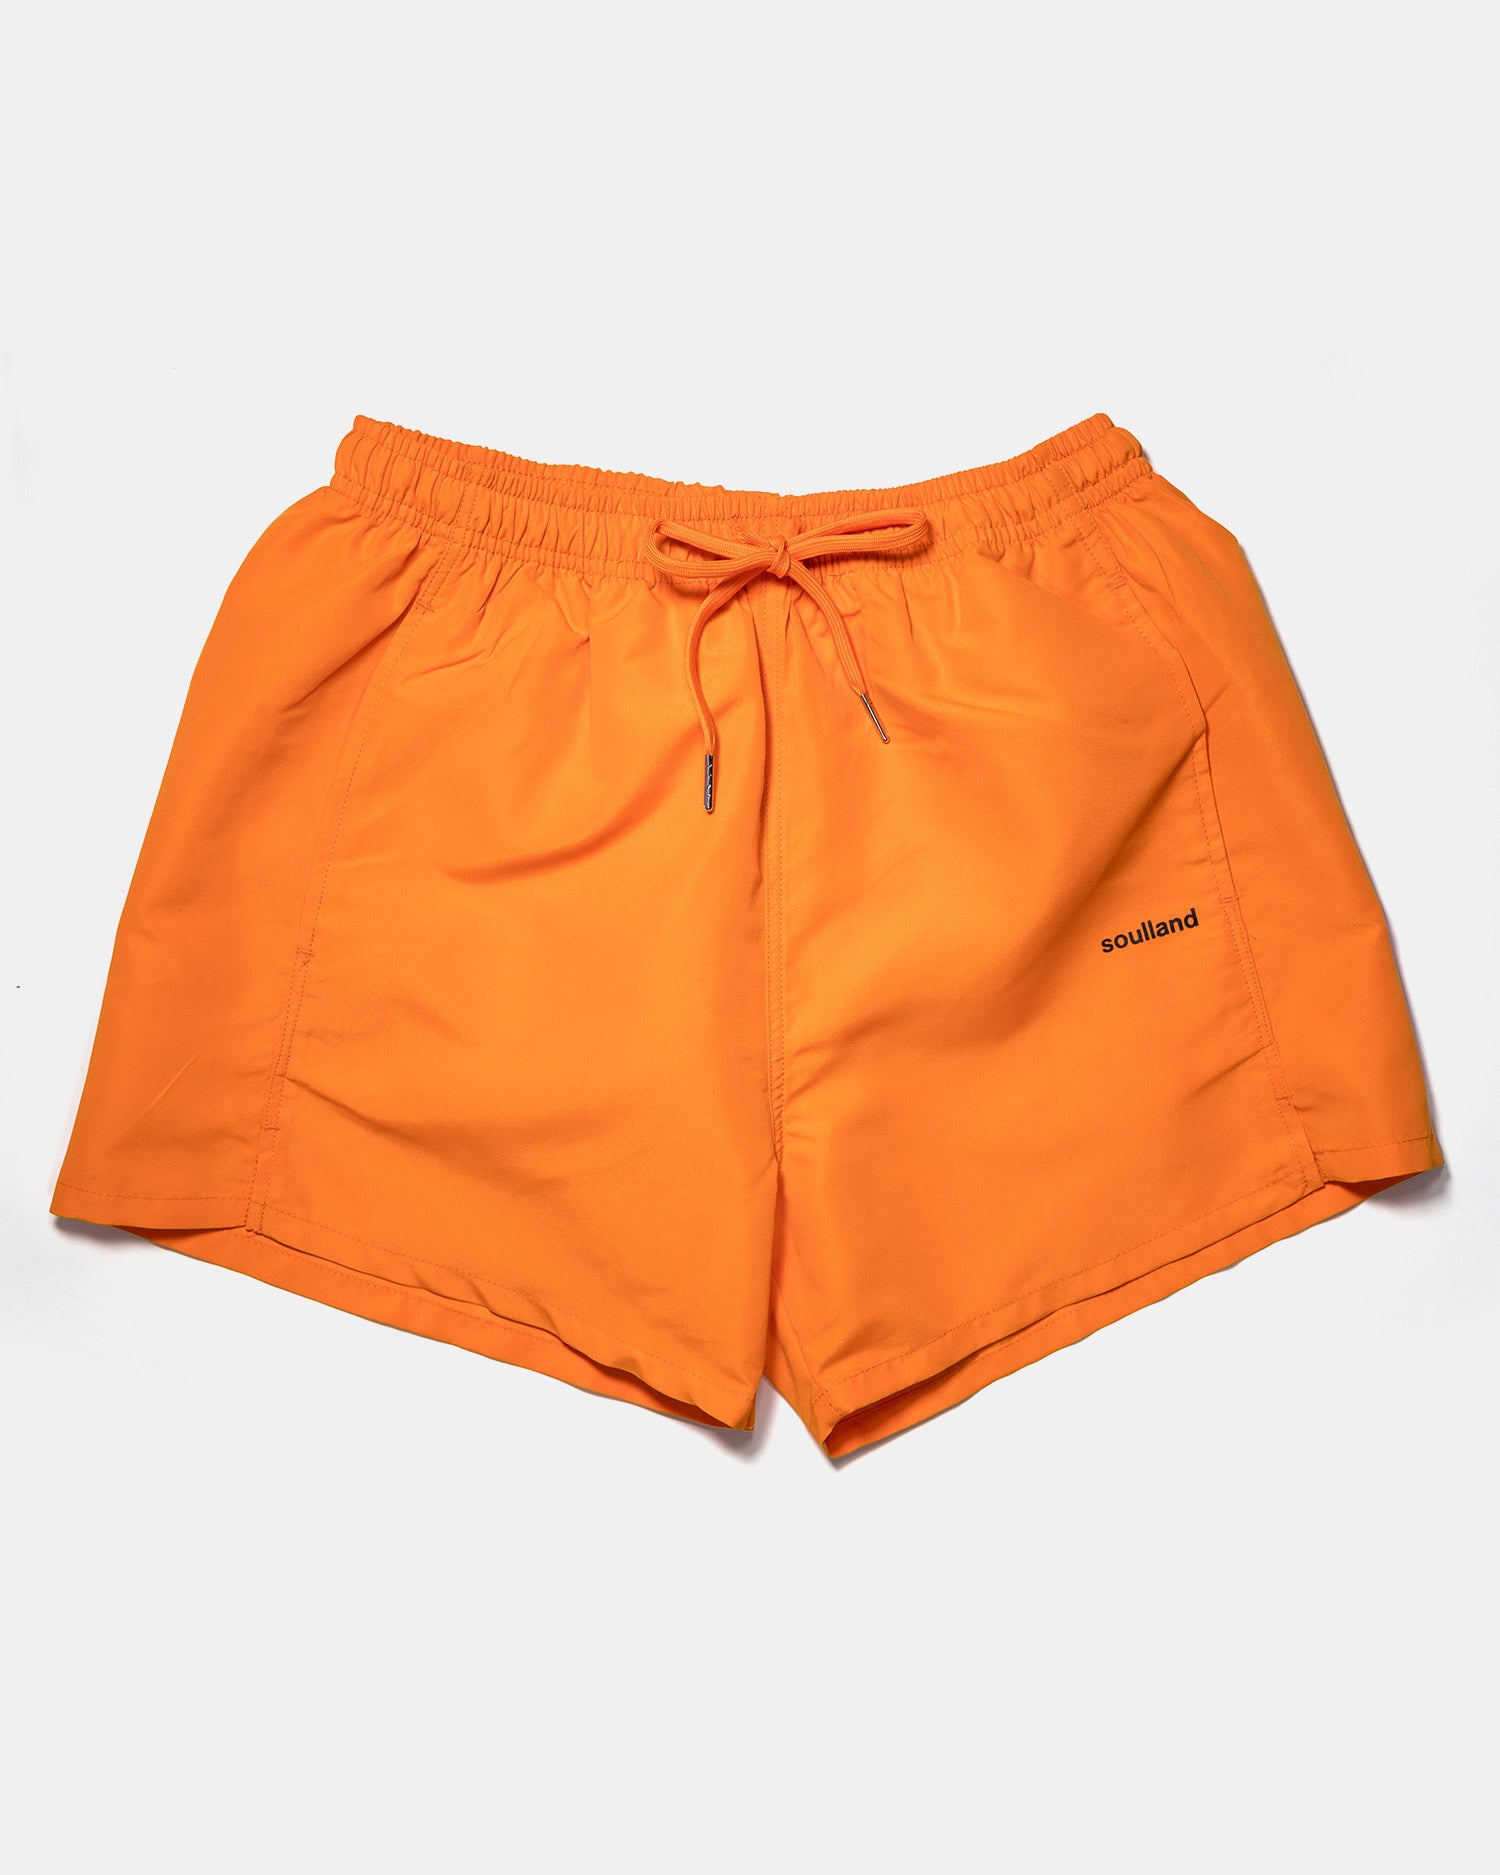 Soulland William Shorts Made from Orange 100% Recycled Polyester